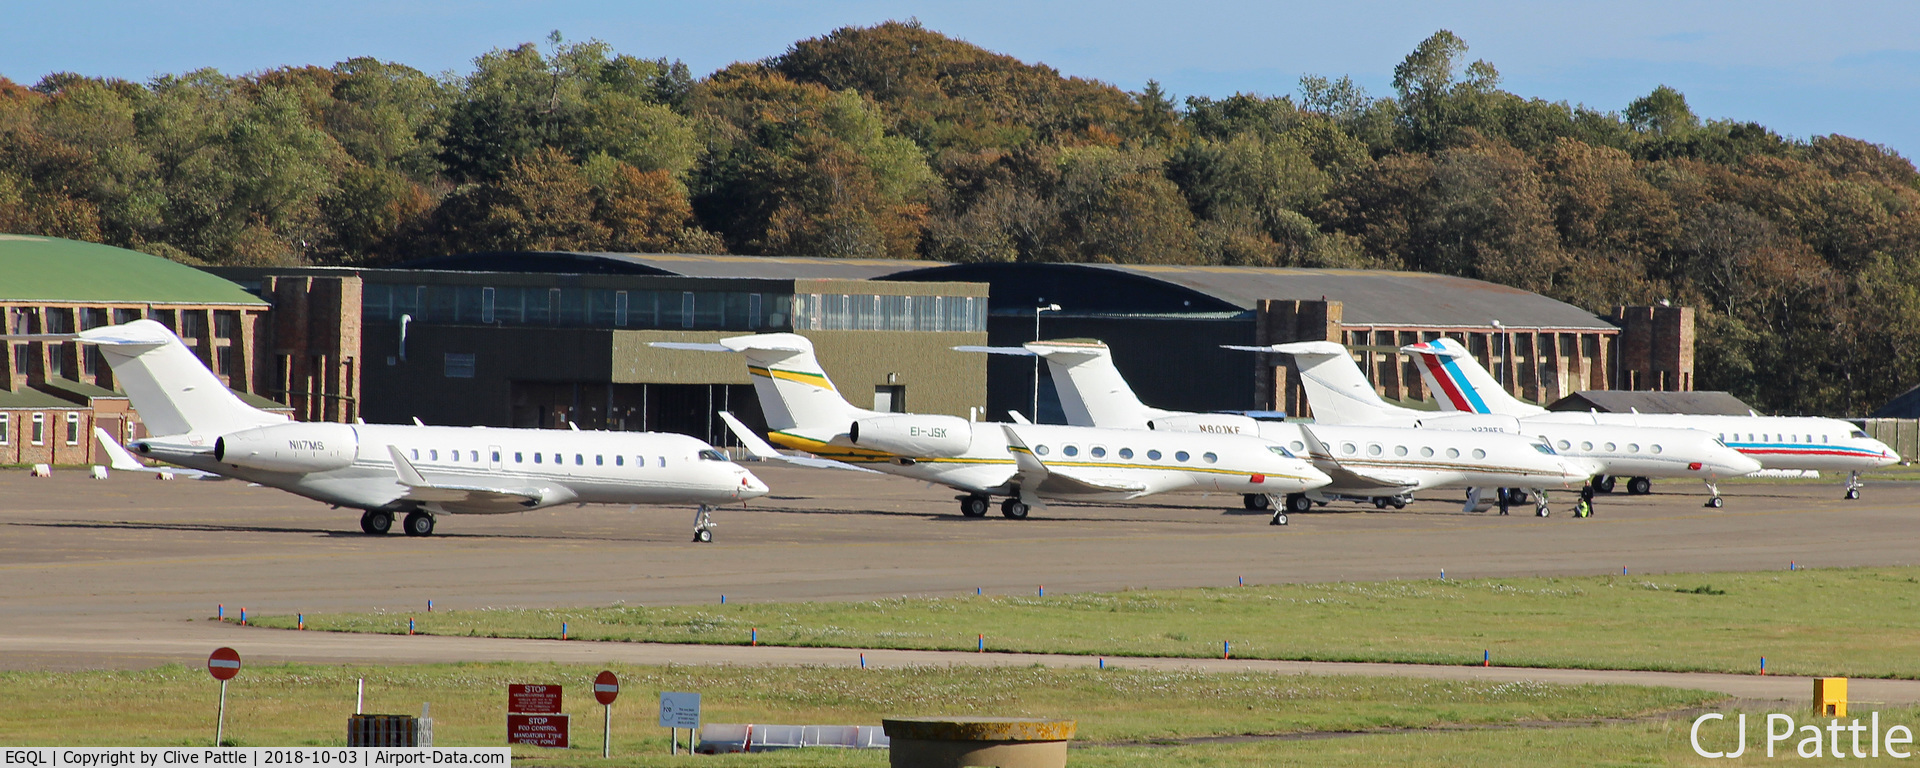 RAF Leuchars Airport, Leuchars, Scotland United Kingdom (EGQL) - A line-up of bizjets at Leuchars Station for the Annual Alfred Dunhill Links Golf Championships being held at the nearby 'Old Course' at St Andrews.